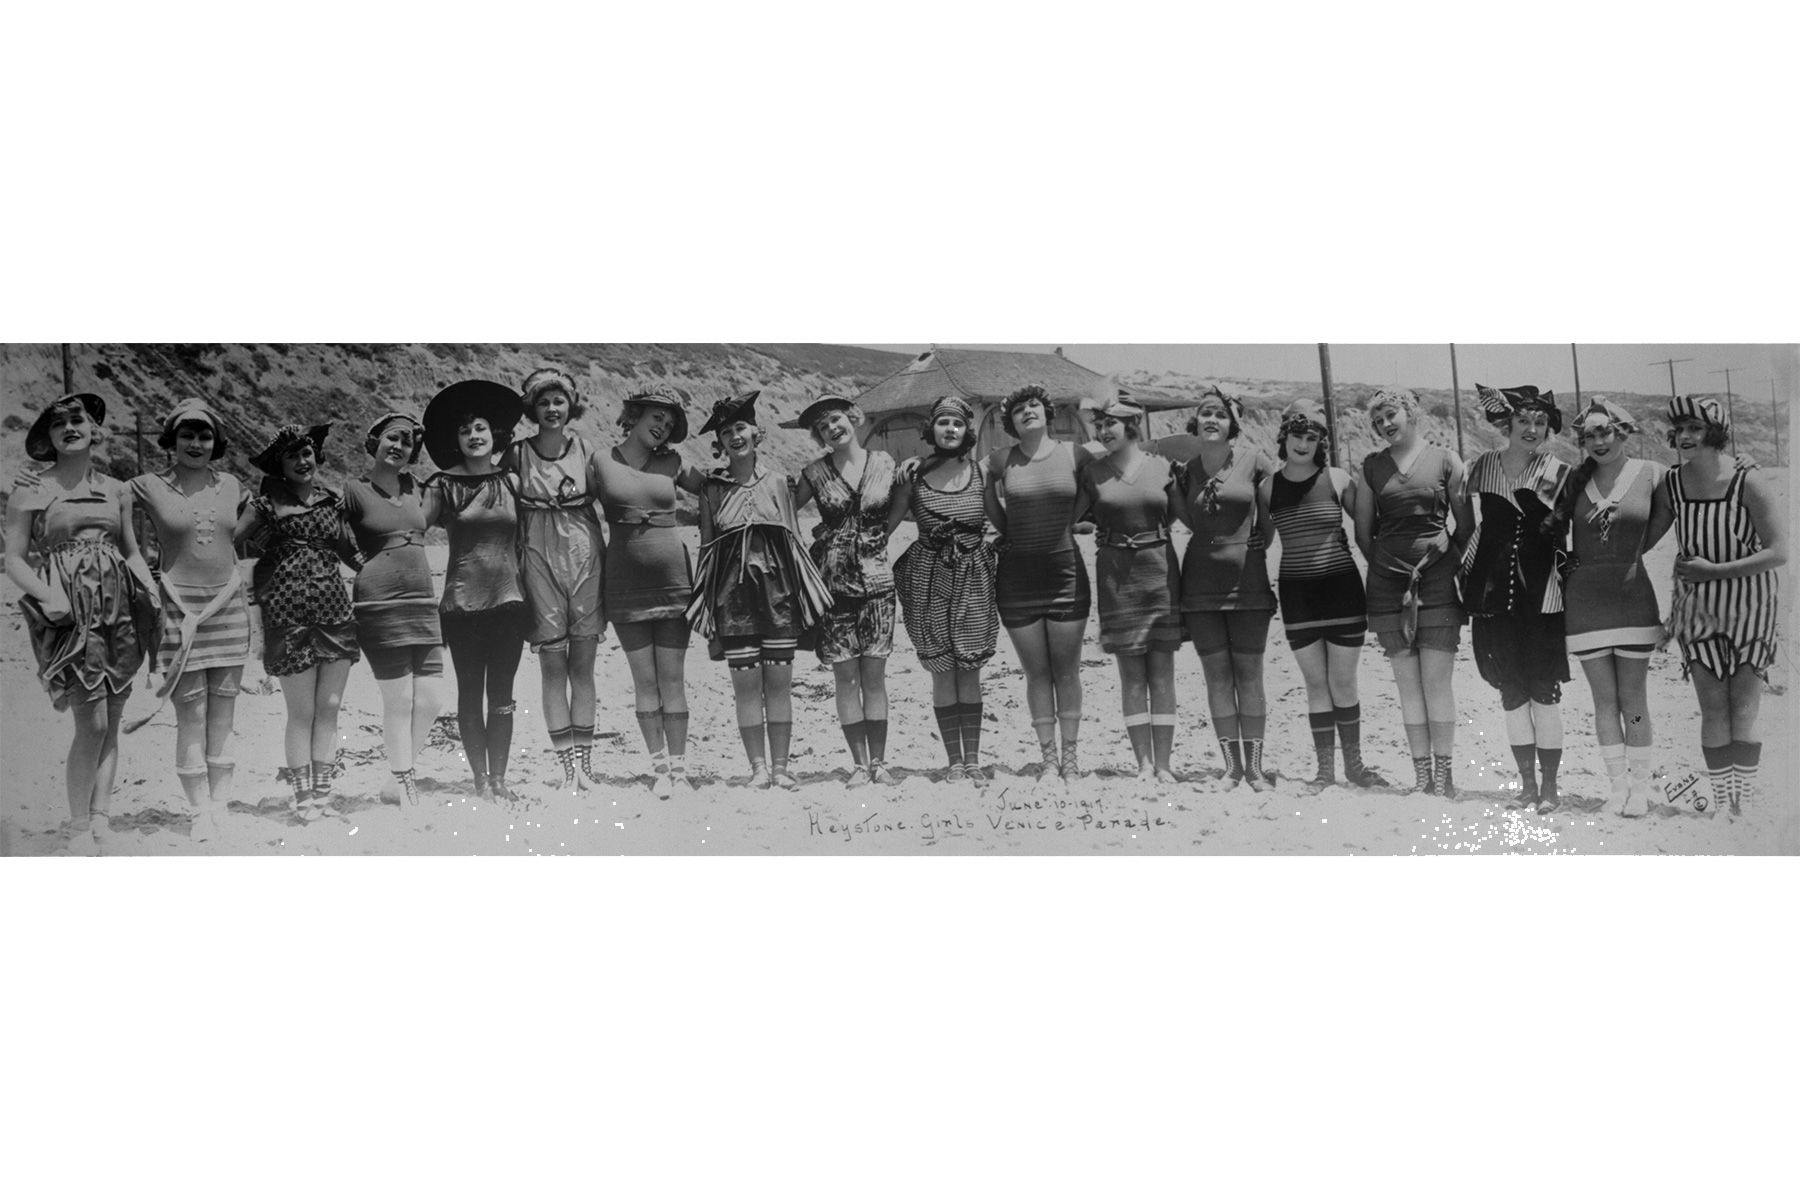 “Sennett Bathing Beauties” at Venice Beach, June 1917. Film producer Mack Sennett hired young women to perform in bathing suits for his silent films and to enter beauty contests at local beaches. By the early 1910’s, bathing suit contests were lending Hollywood glamour and sex appeal to California beach culture. Security Pacific National Banks Collection/Los Angeles Public Library.